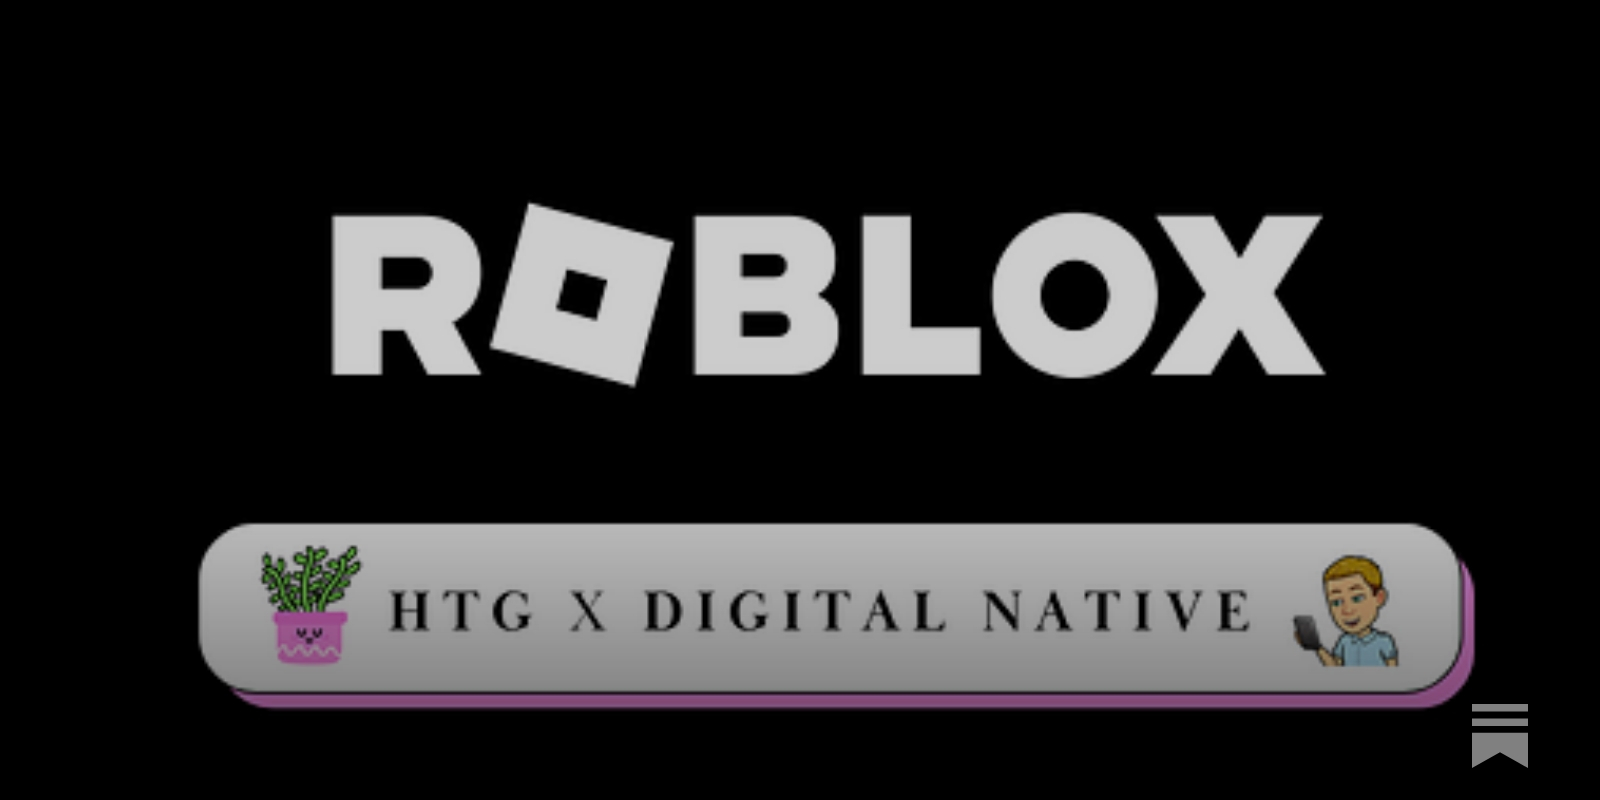 Roblox taps former Google Play VP for creator role